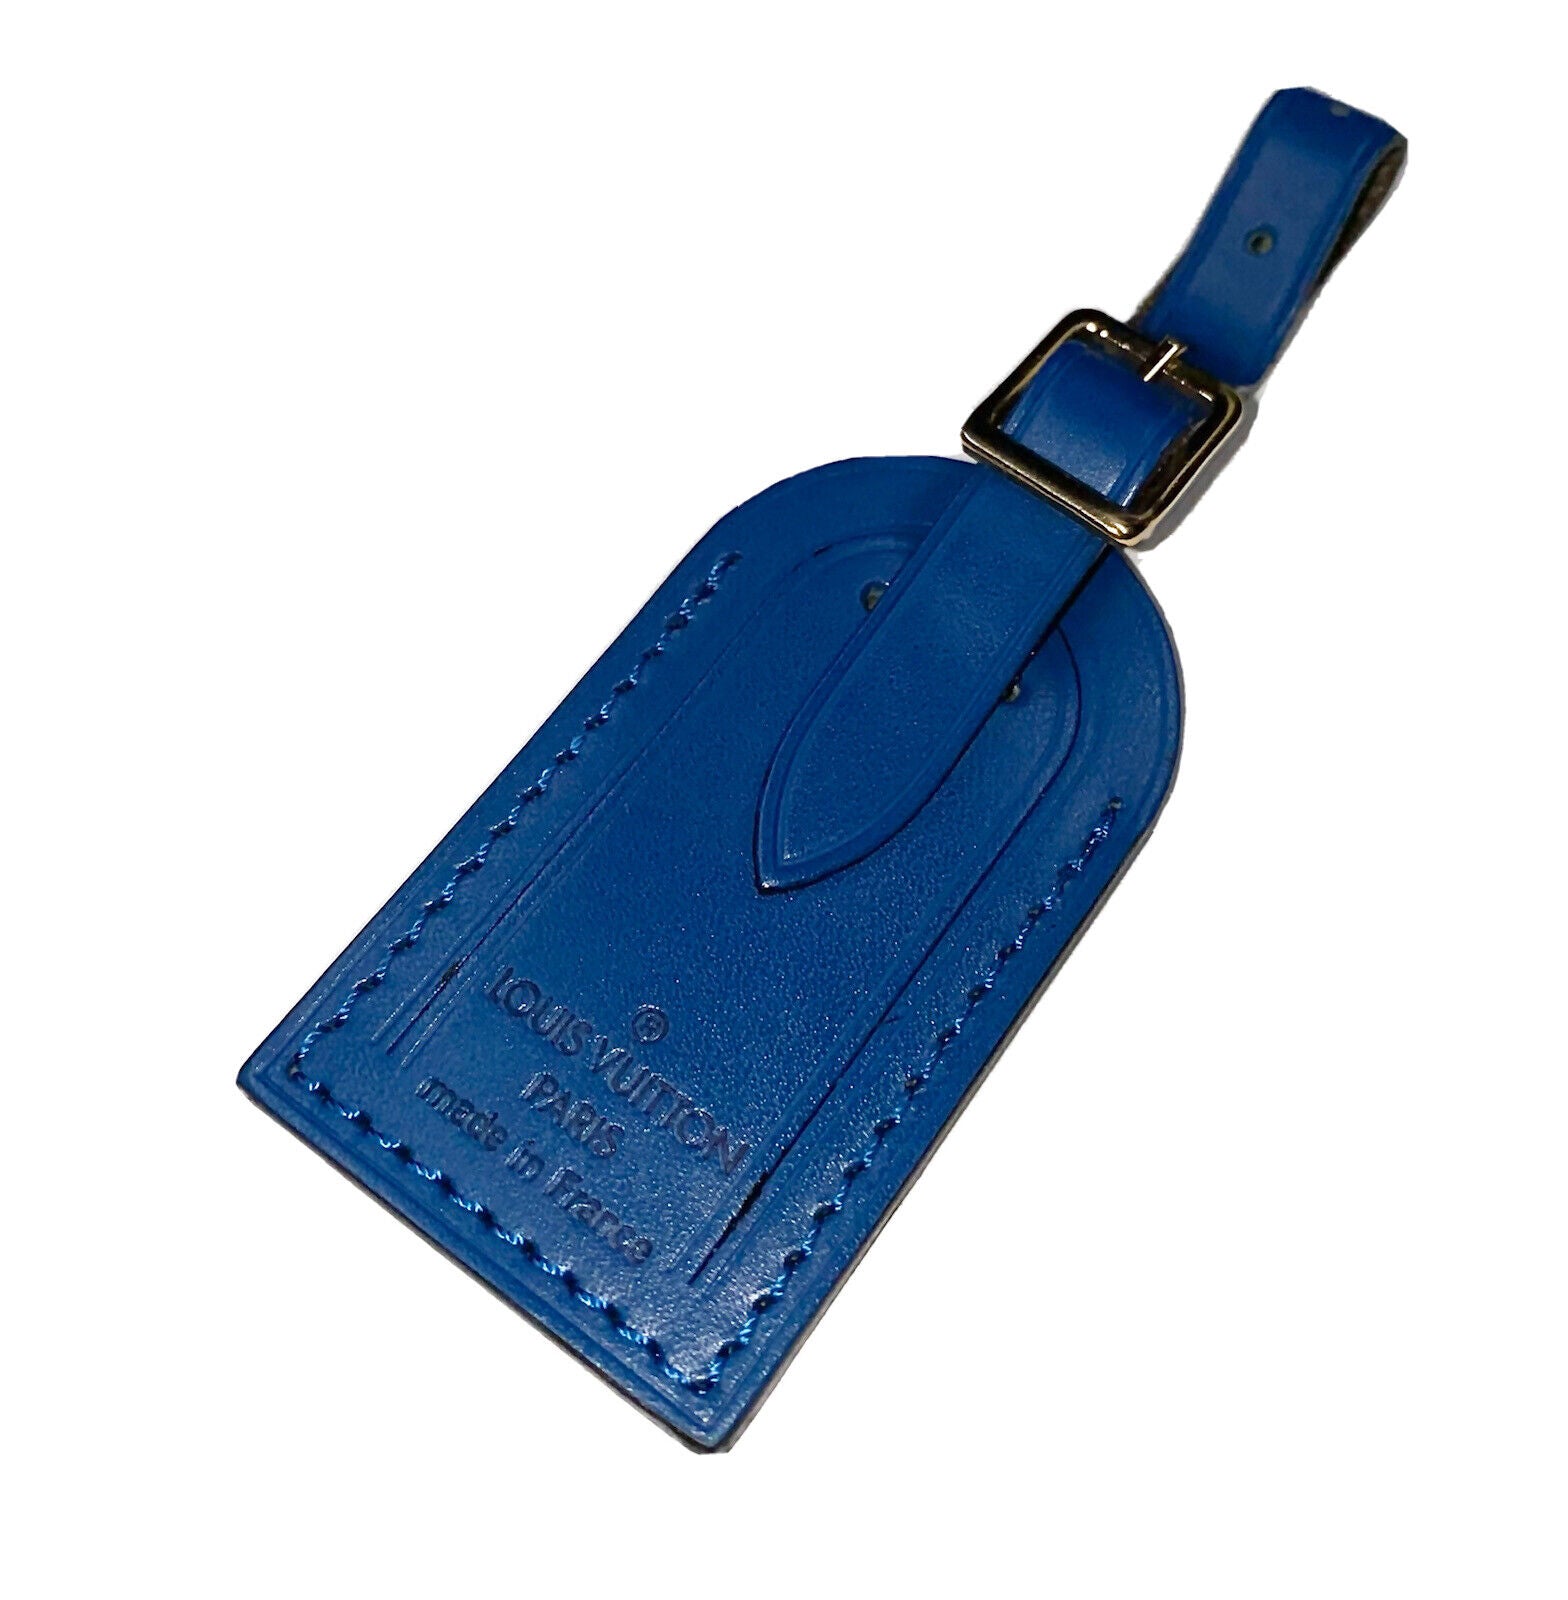 Louis Vuitton Luggage Tag Toledo Blue Small Calfskin Leather